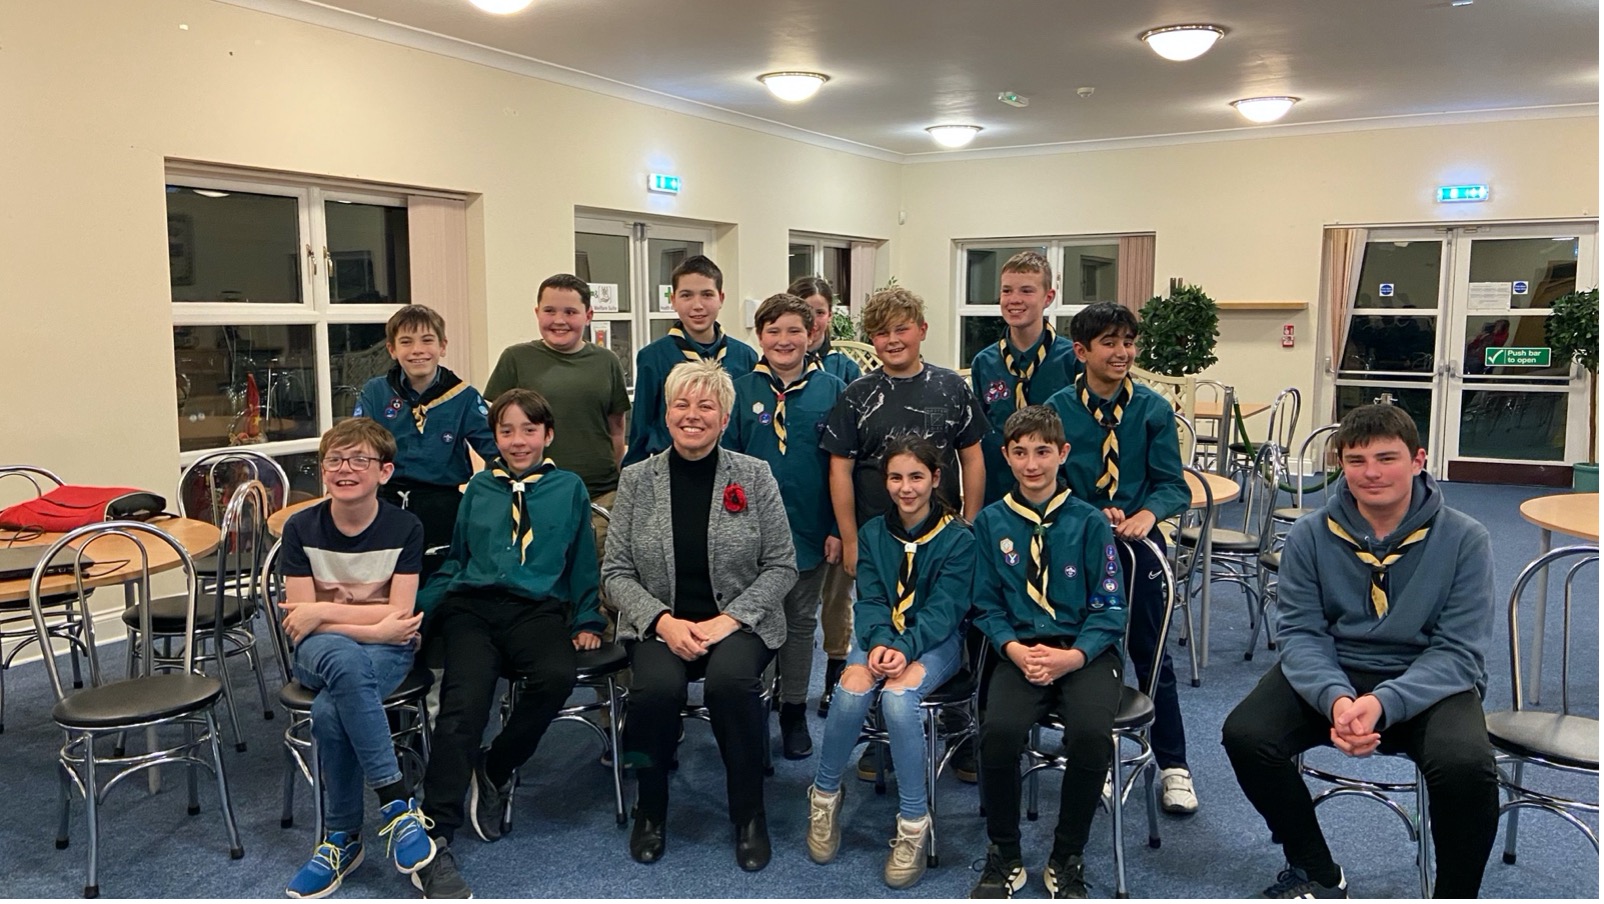 Lia Nici MP (Centre) surrounded by 11th Grimsby Scout Troop